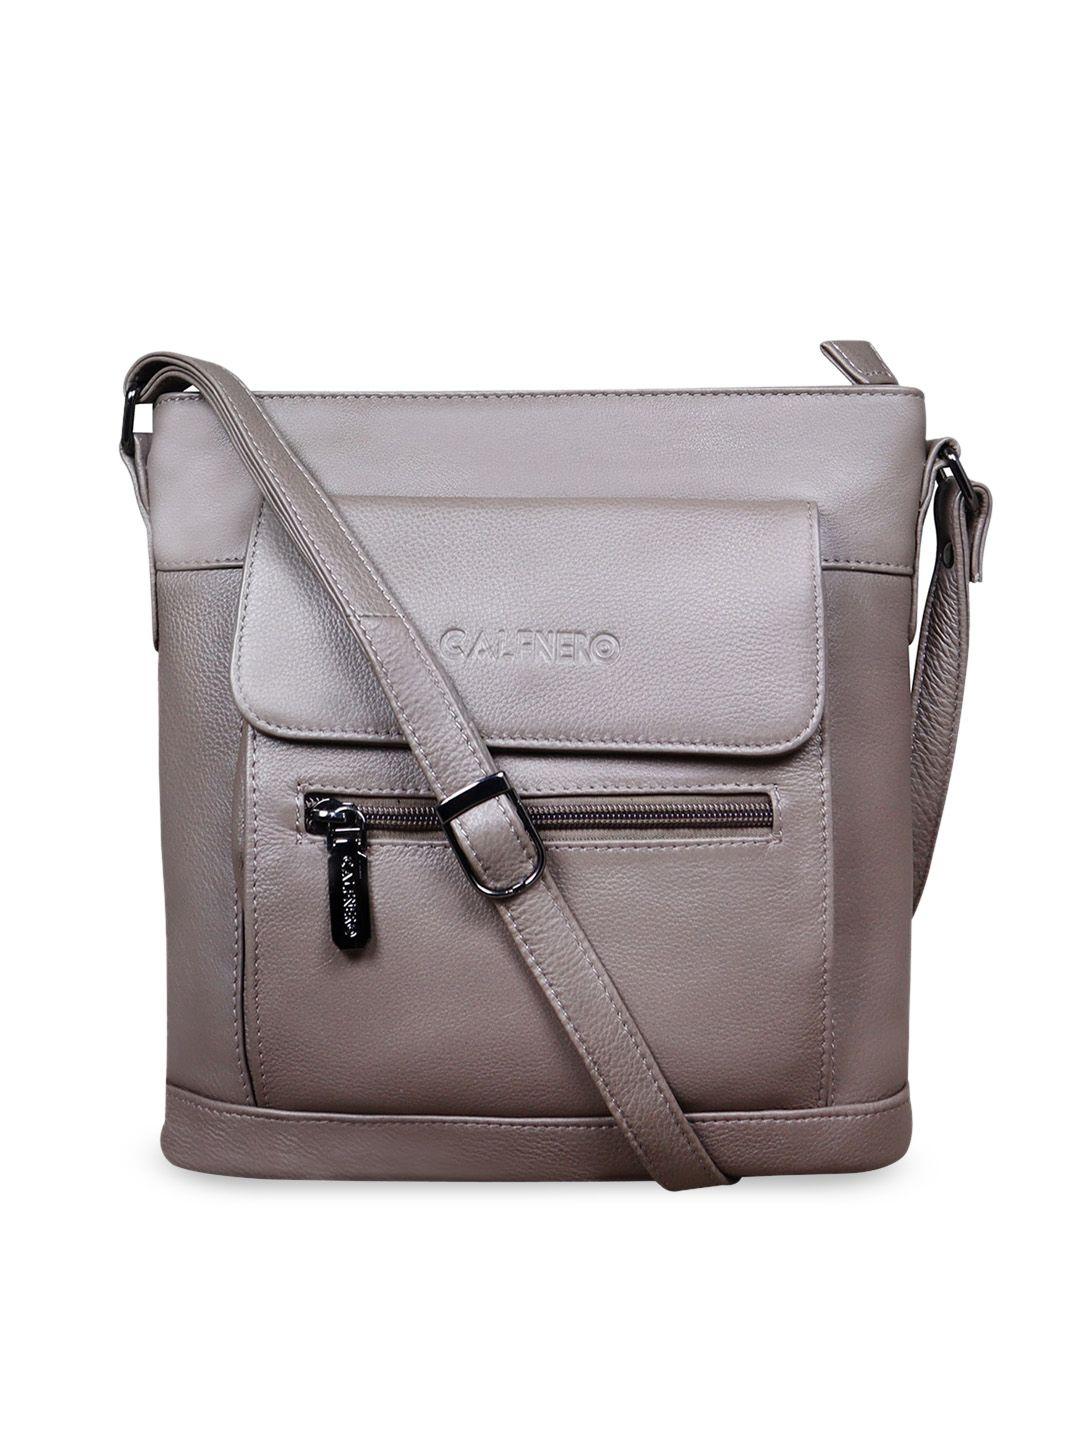 calfnero women leather structured sling bag